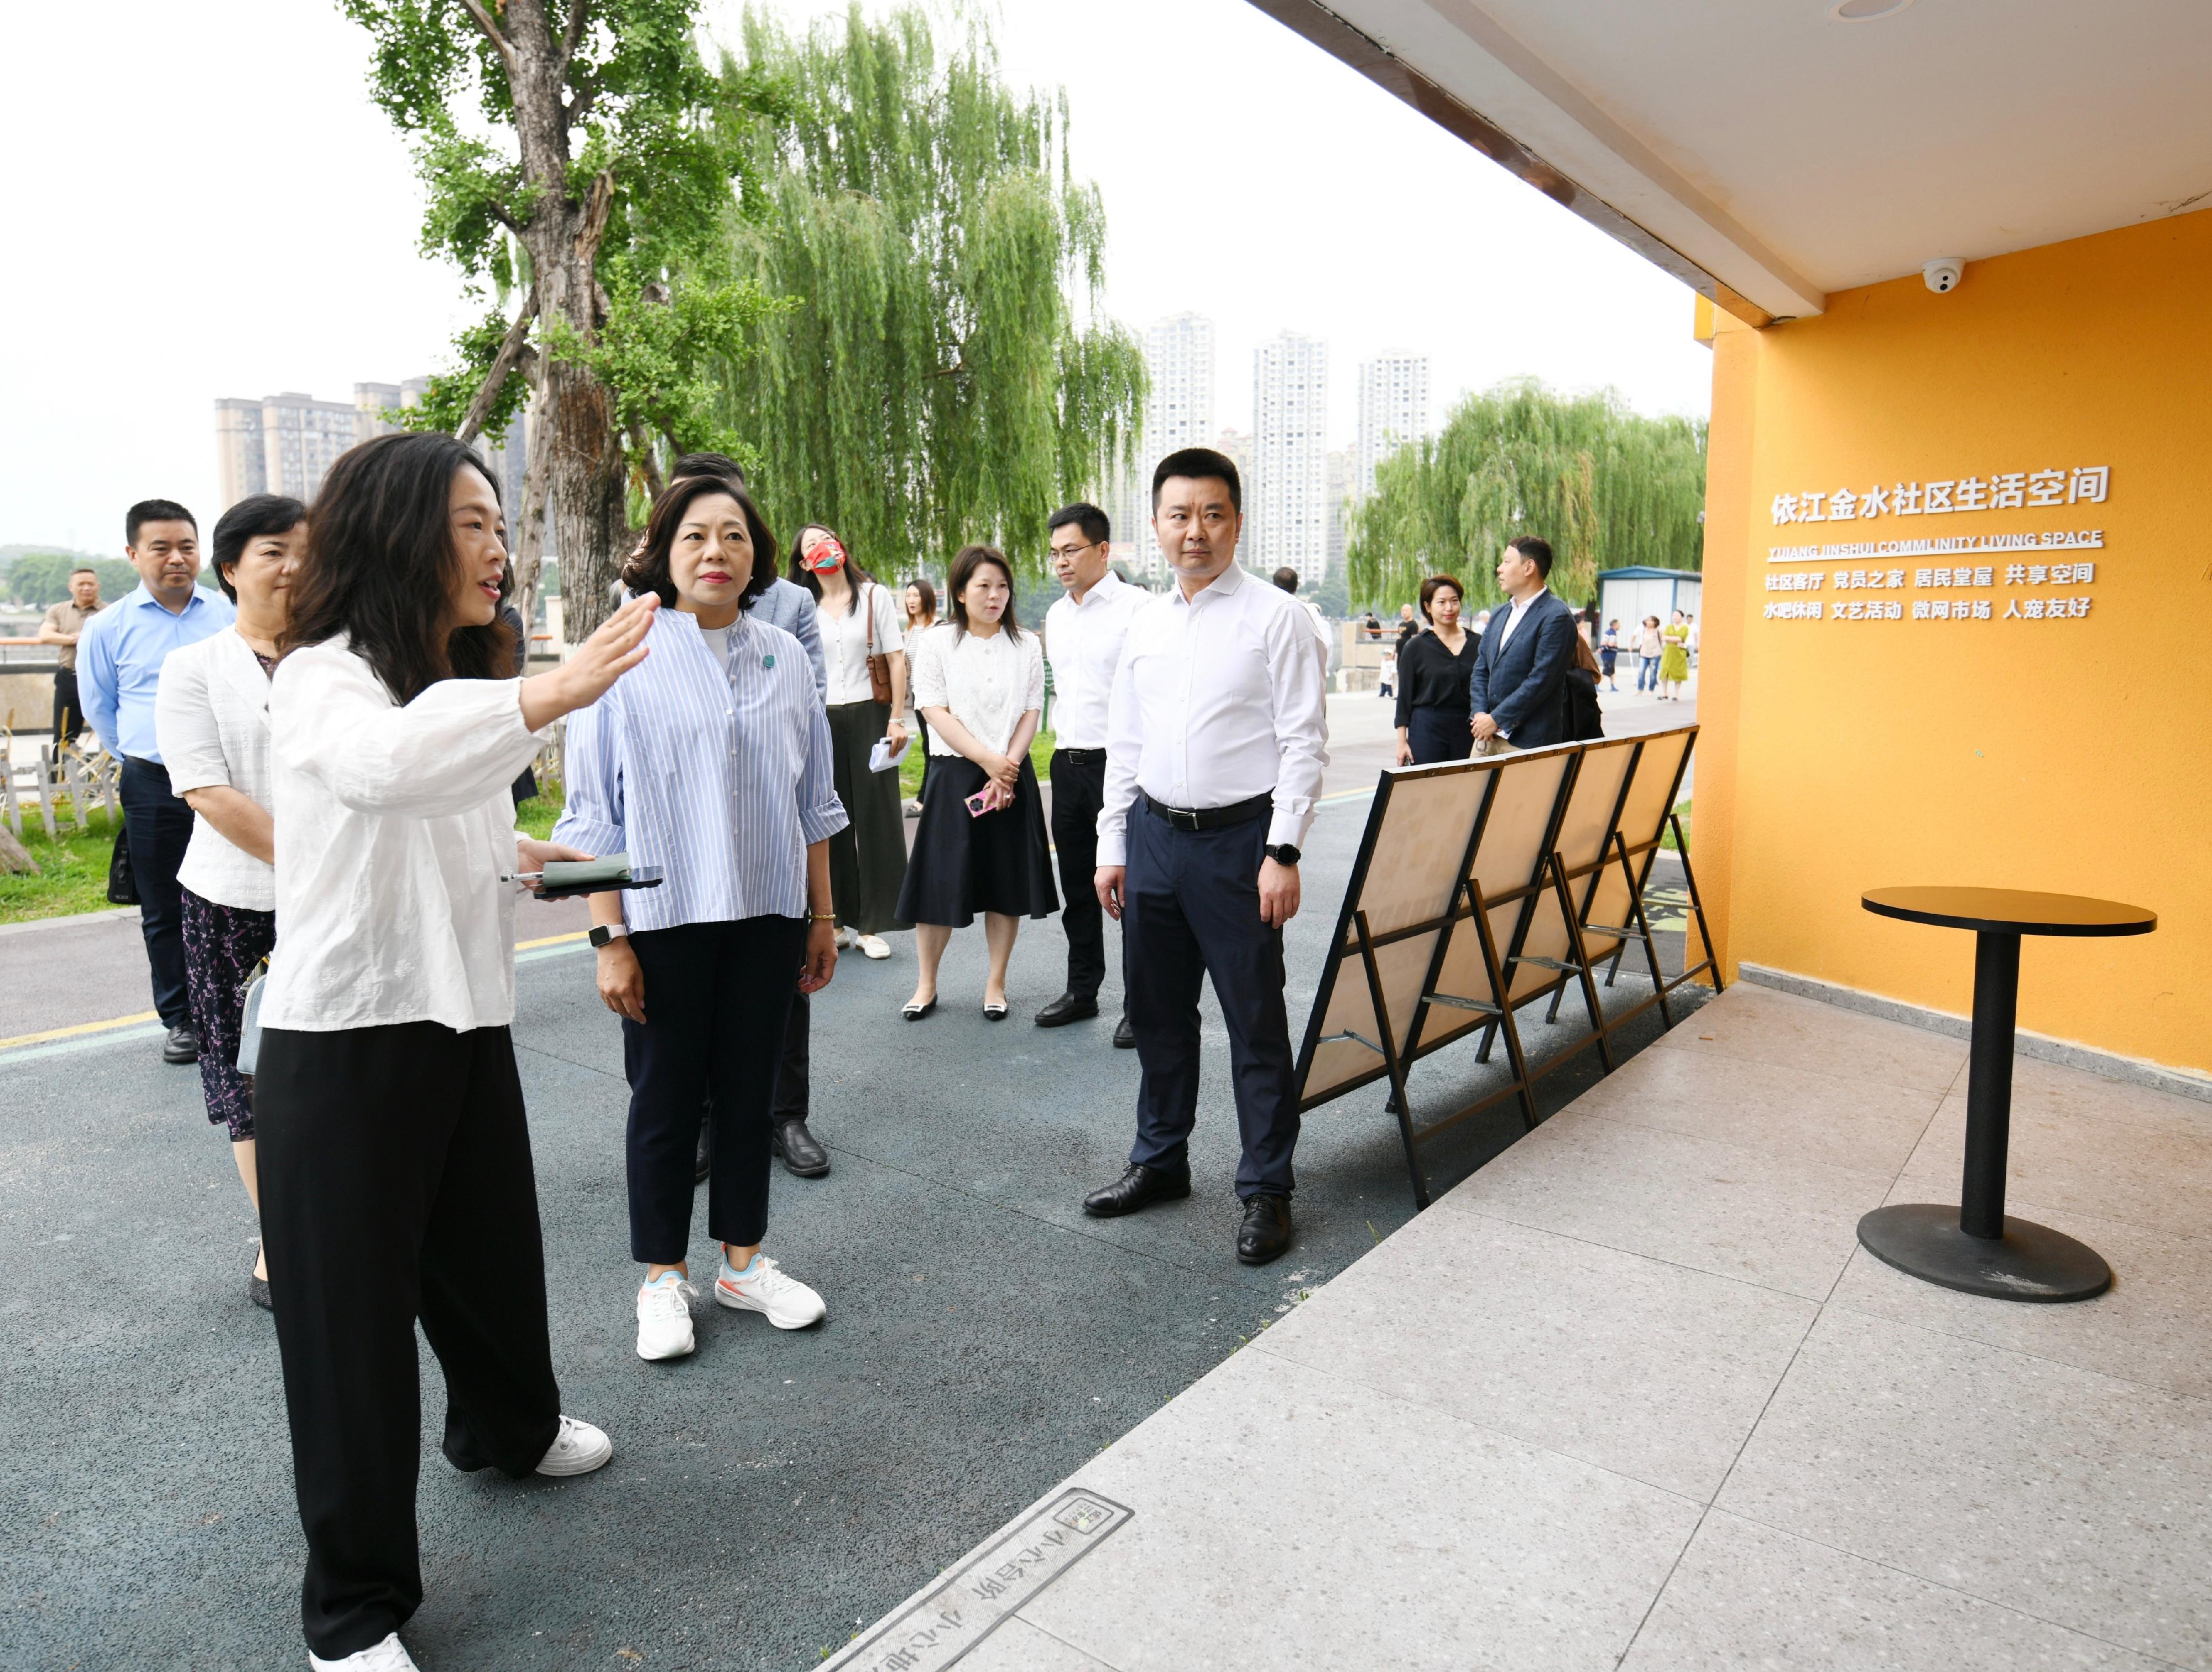 The Secretary for Home and Youth Affairs, Miss Alice Mak, visited Chengdu today (June 6). Photo shows Miss Mak (second left) visiting the Yijiang Jinshui Community Living Space.